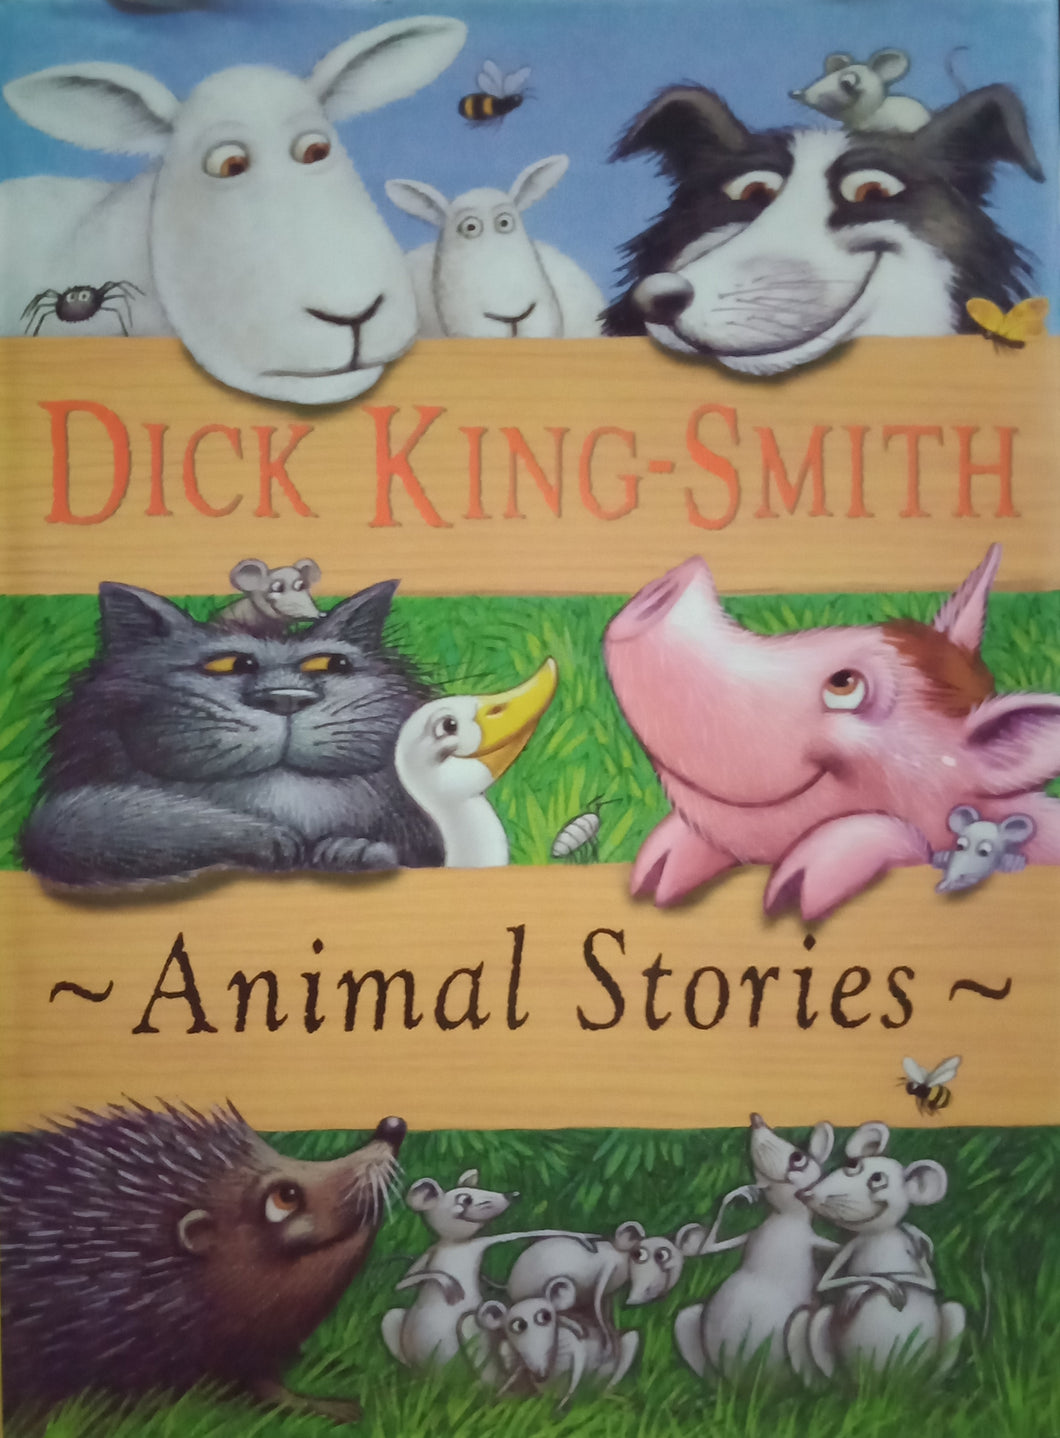 Animal Stories by Dick King-Smith